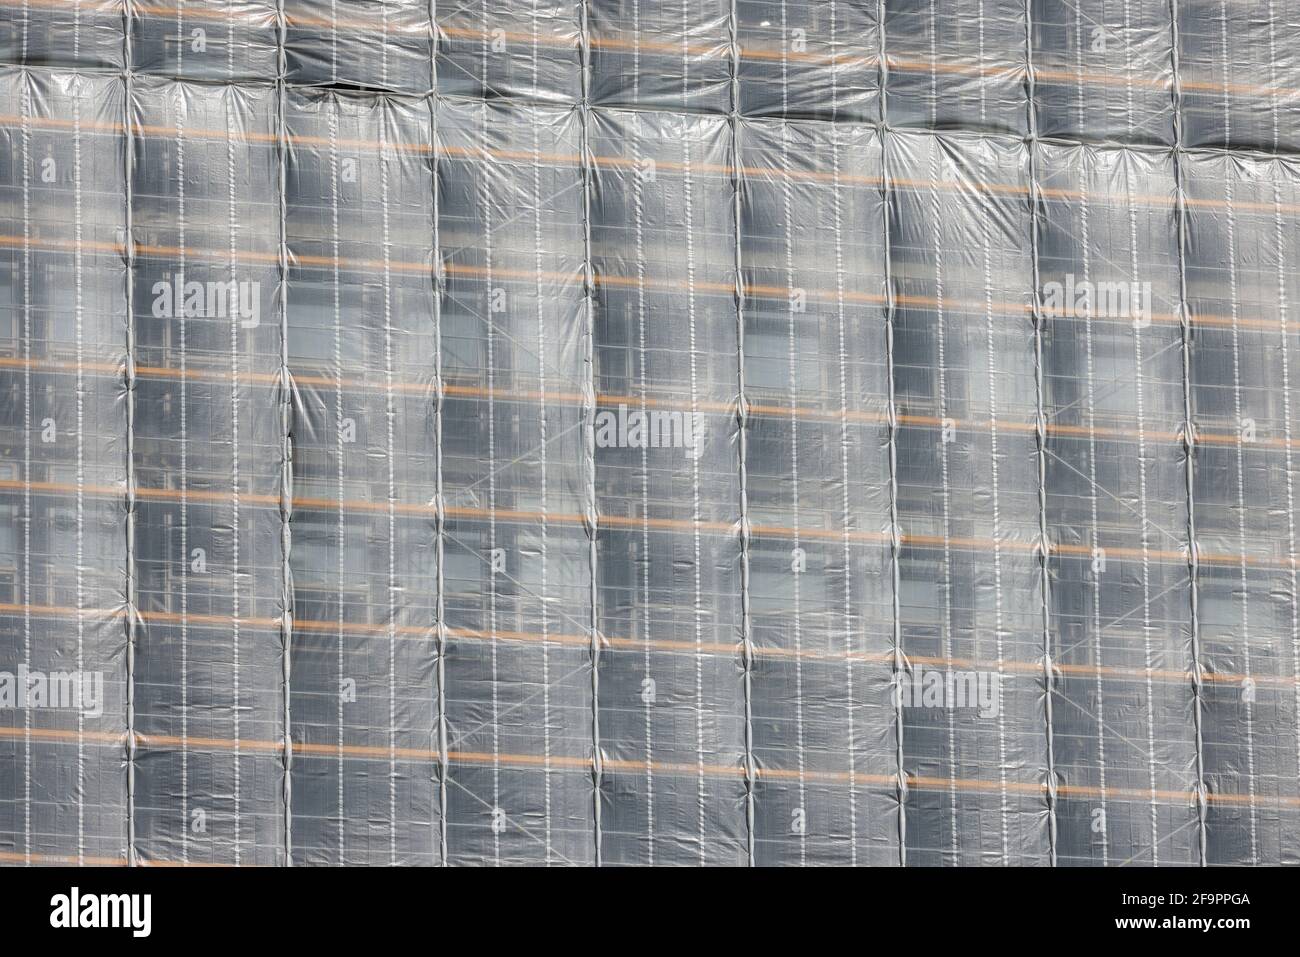 19.03.2021, Essen, North Rhine-Westphalia, Germany - Rubble-covered construction site facade. 00X210319D050CAROEX.JPG [MODEL RELEASE: NO, PROPERTY REL Stock Photo